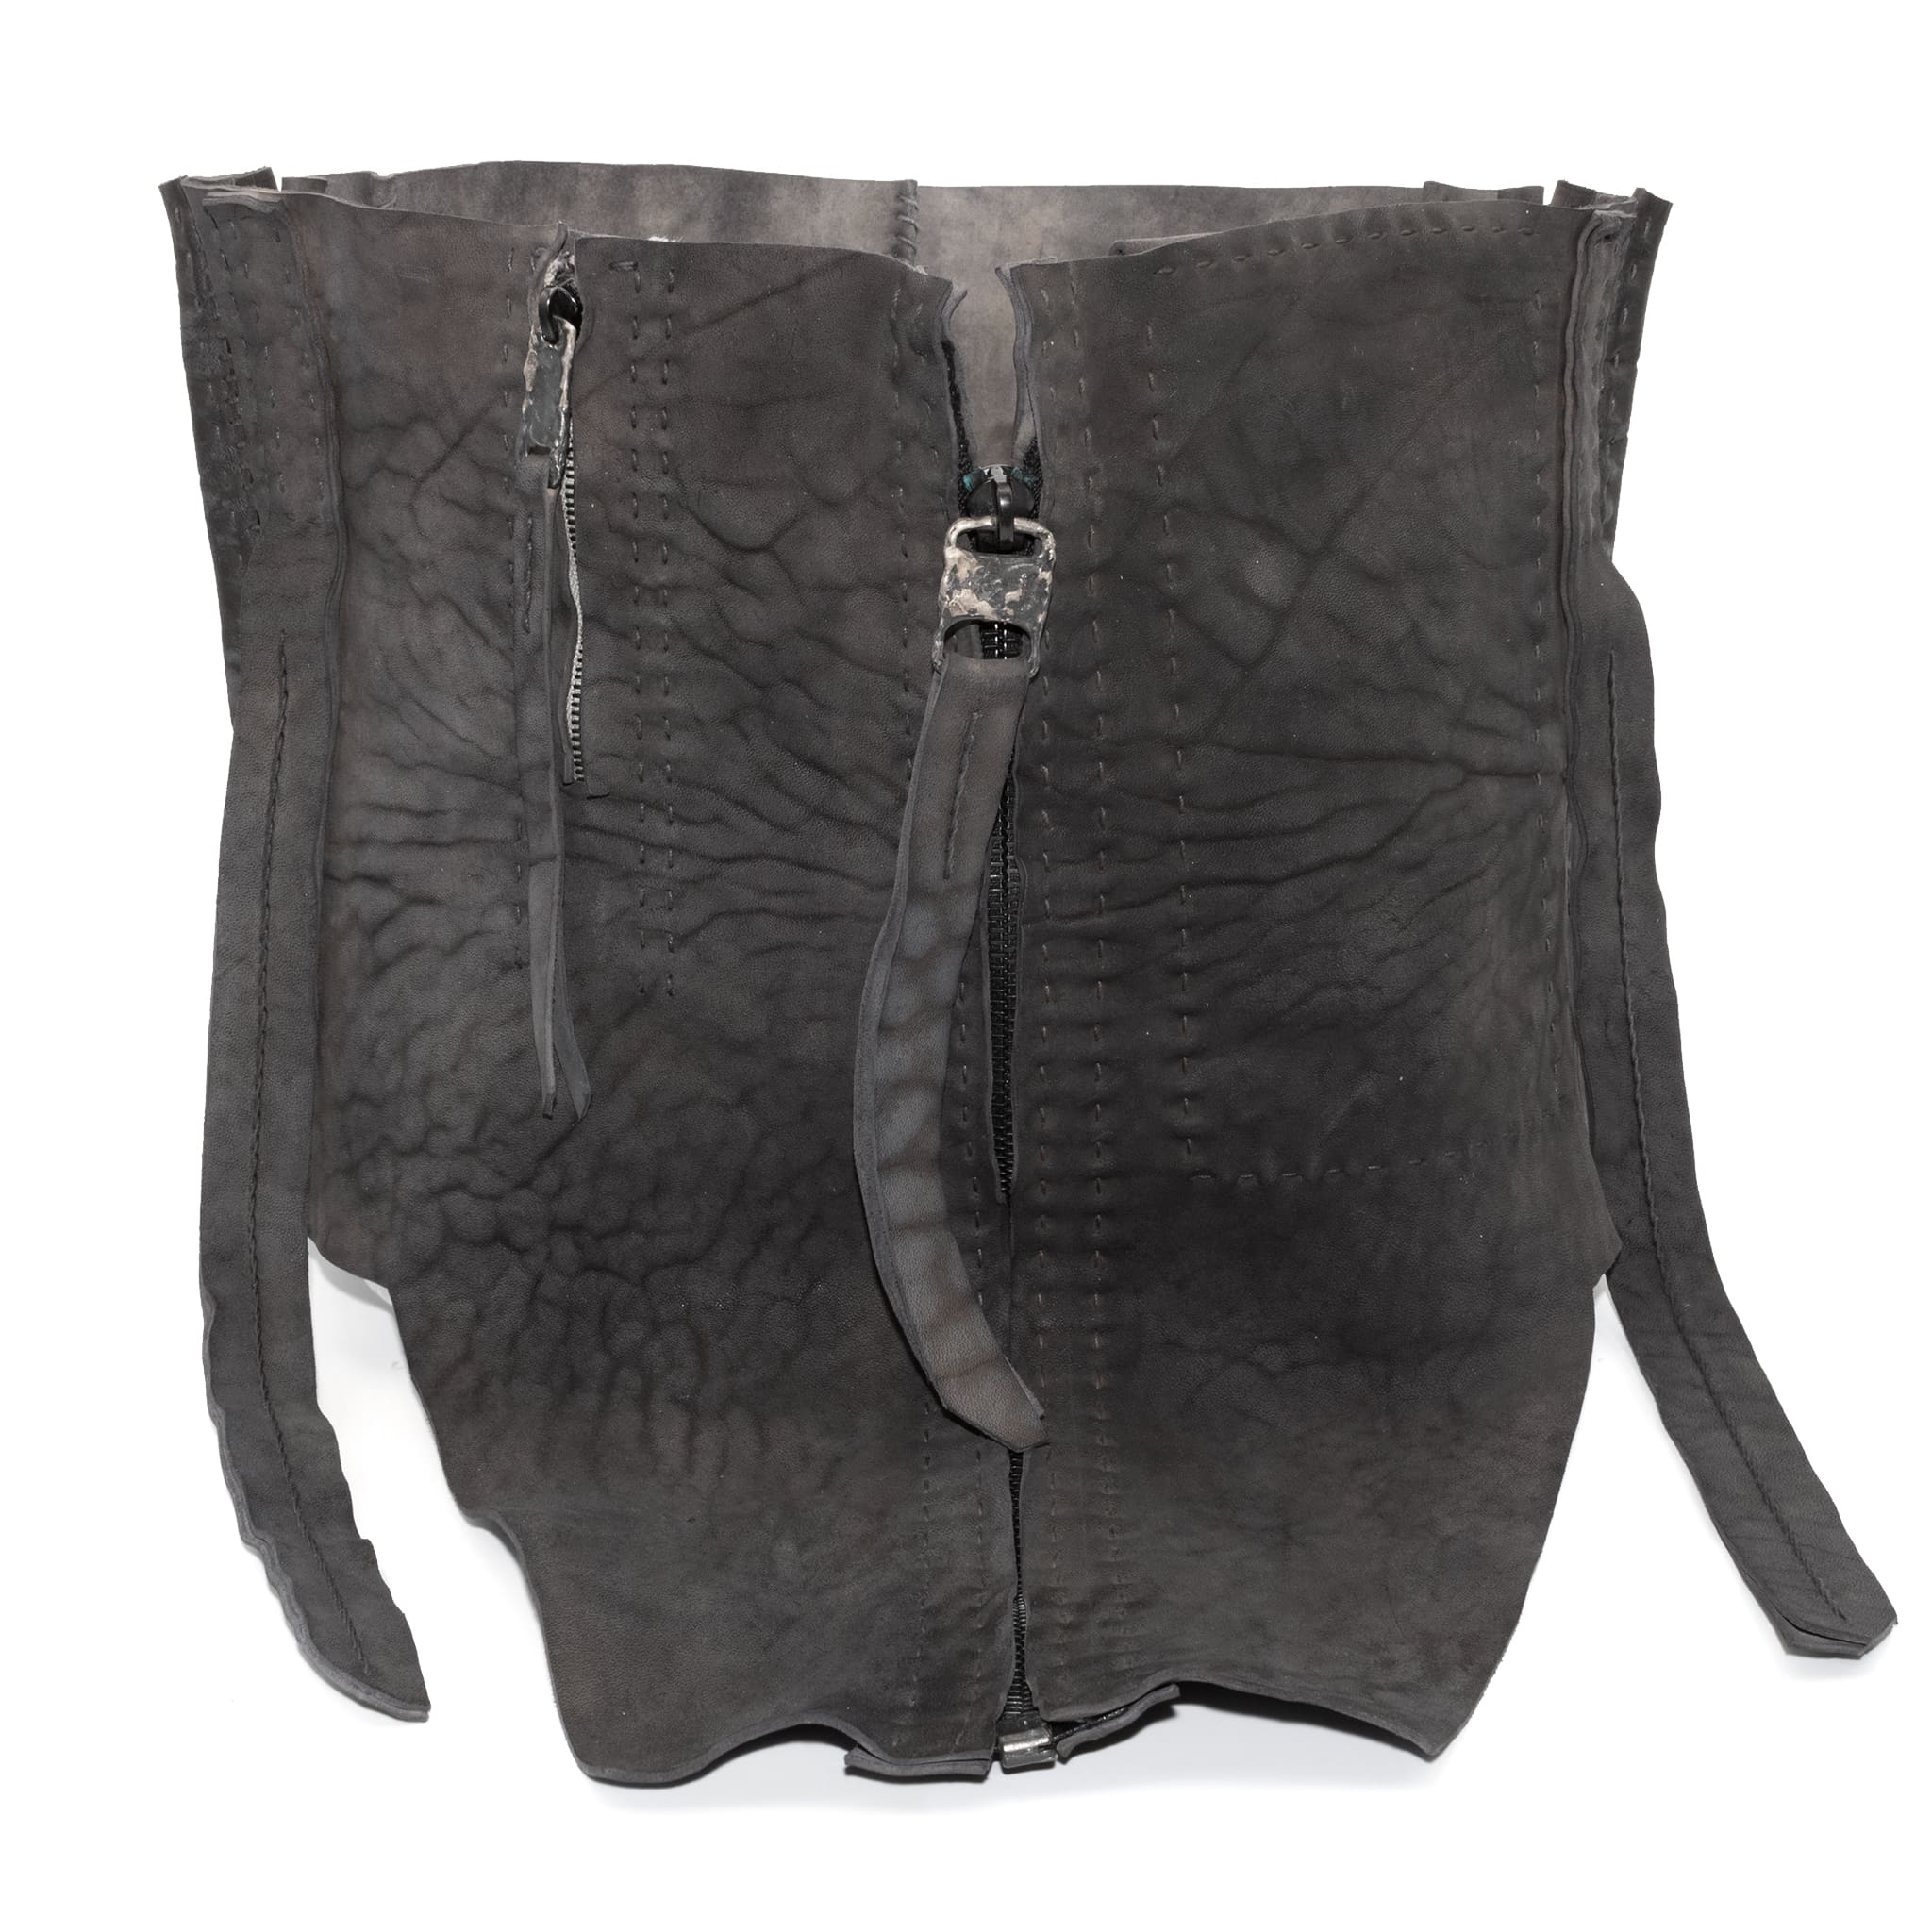 horse culatta leather scarf available online at atelierskn.com